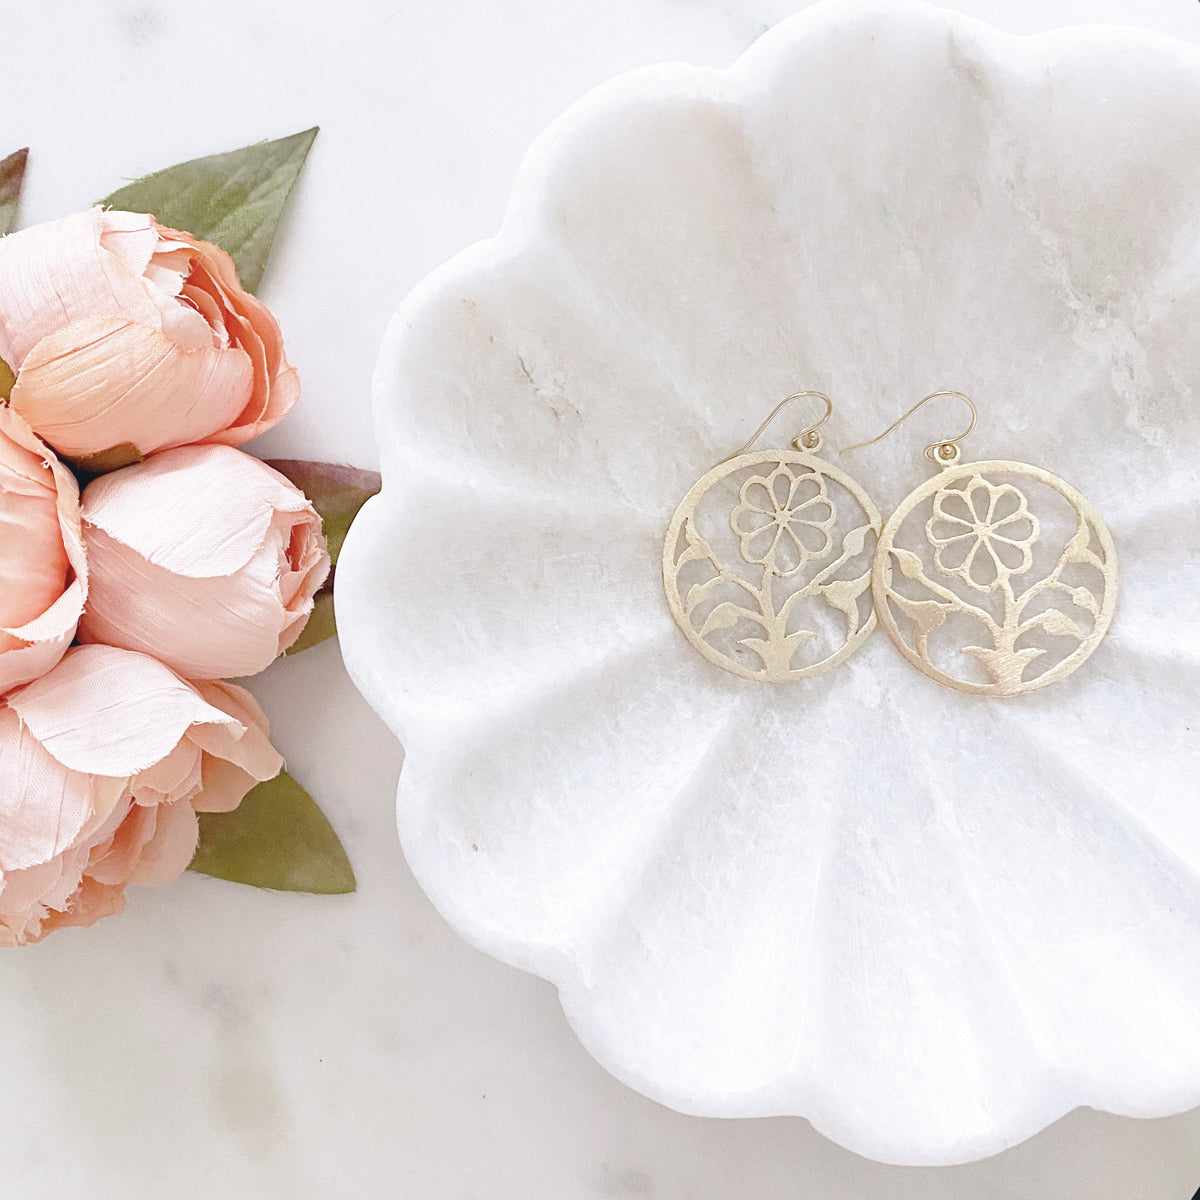 Marigold Brushed Gold Flower Statement Earrings – The Dainty Doe